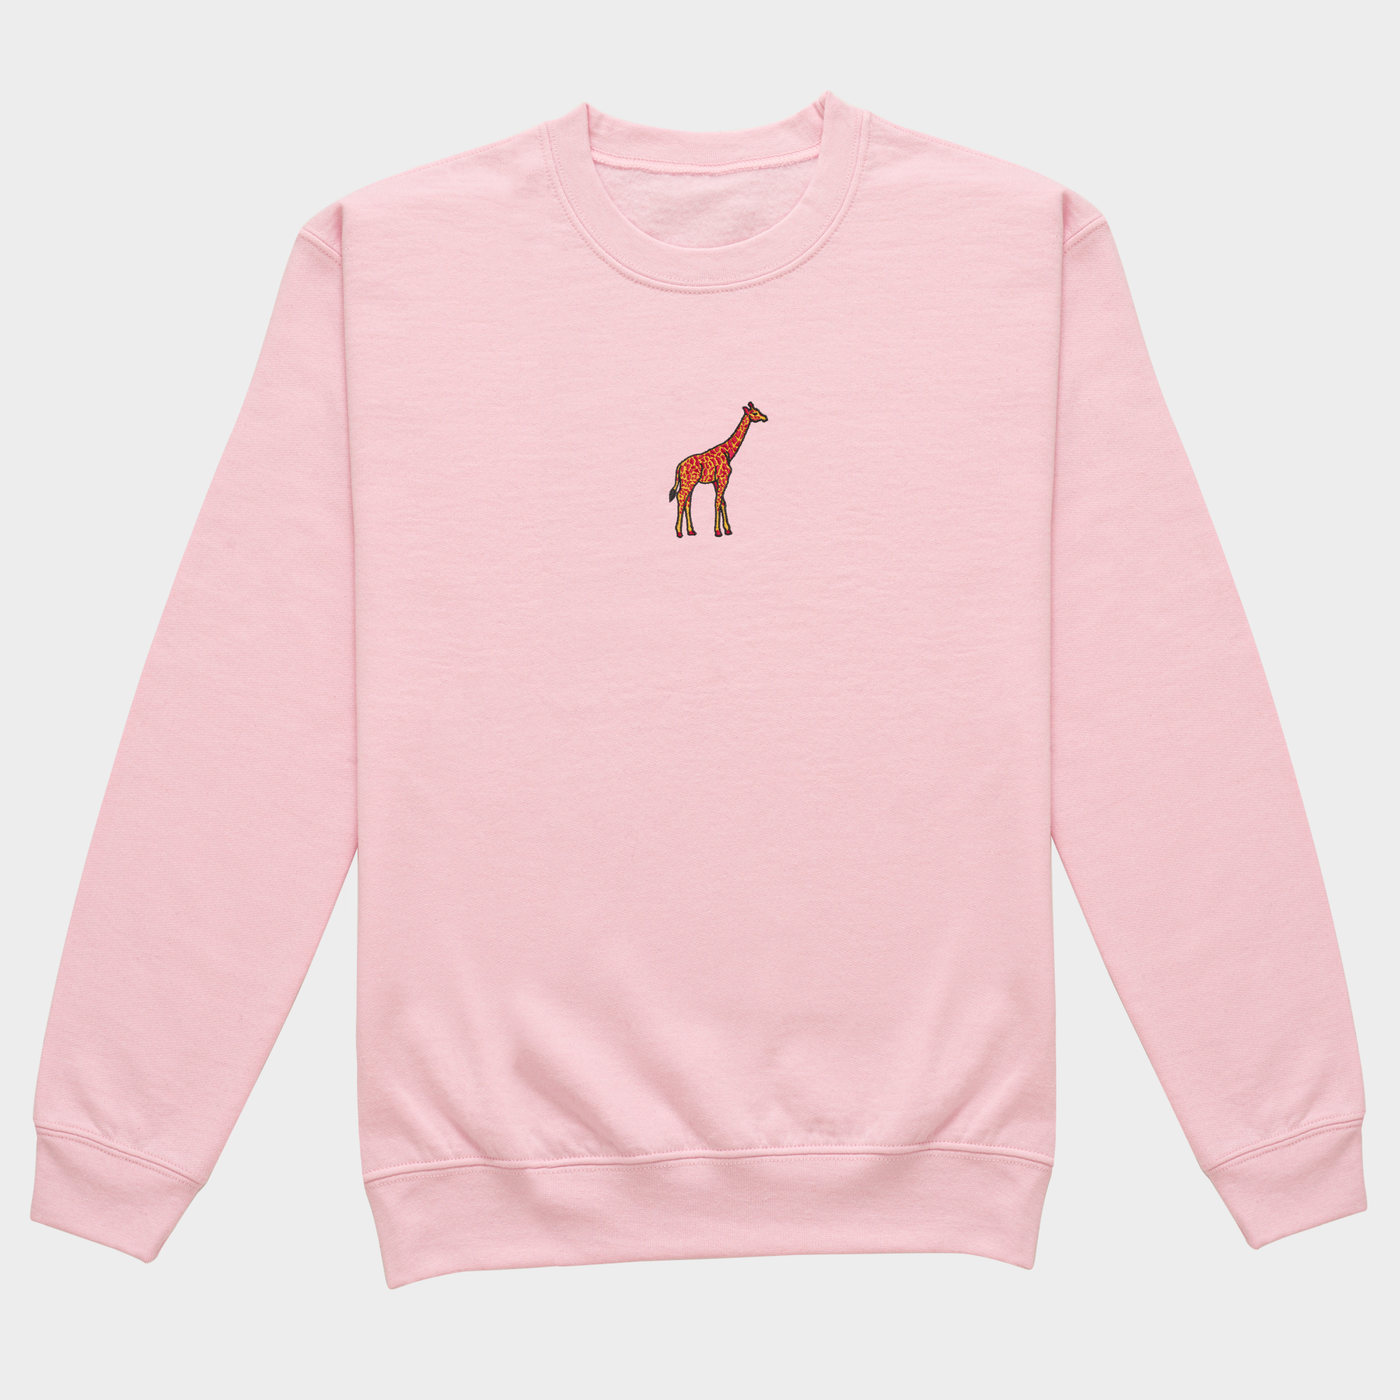 Bobby's Planet Women's Embroidered Giraffe Sweatshirt from African Animals Collection in Light Pink Color#color_light-pink